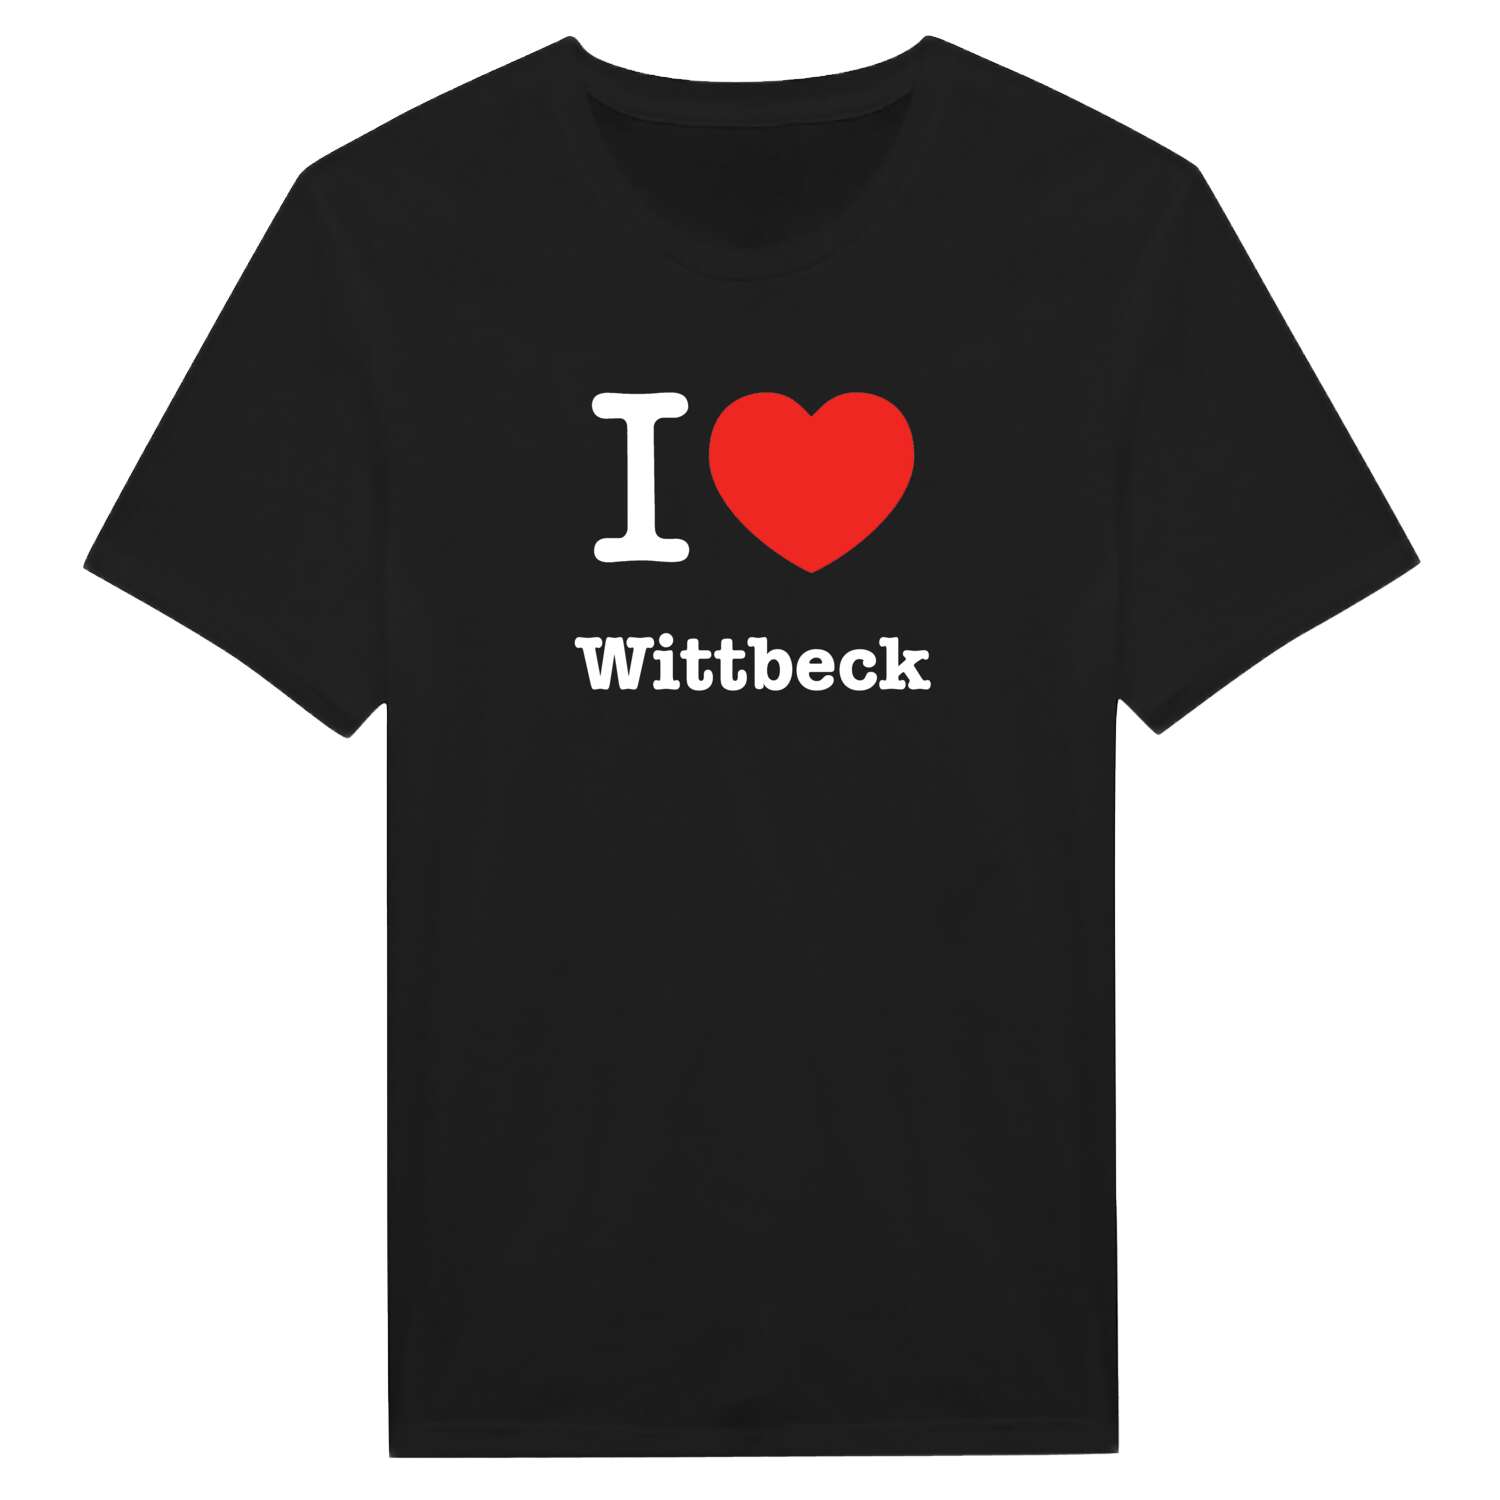 Wittbeck T-Shirt »I love«